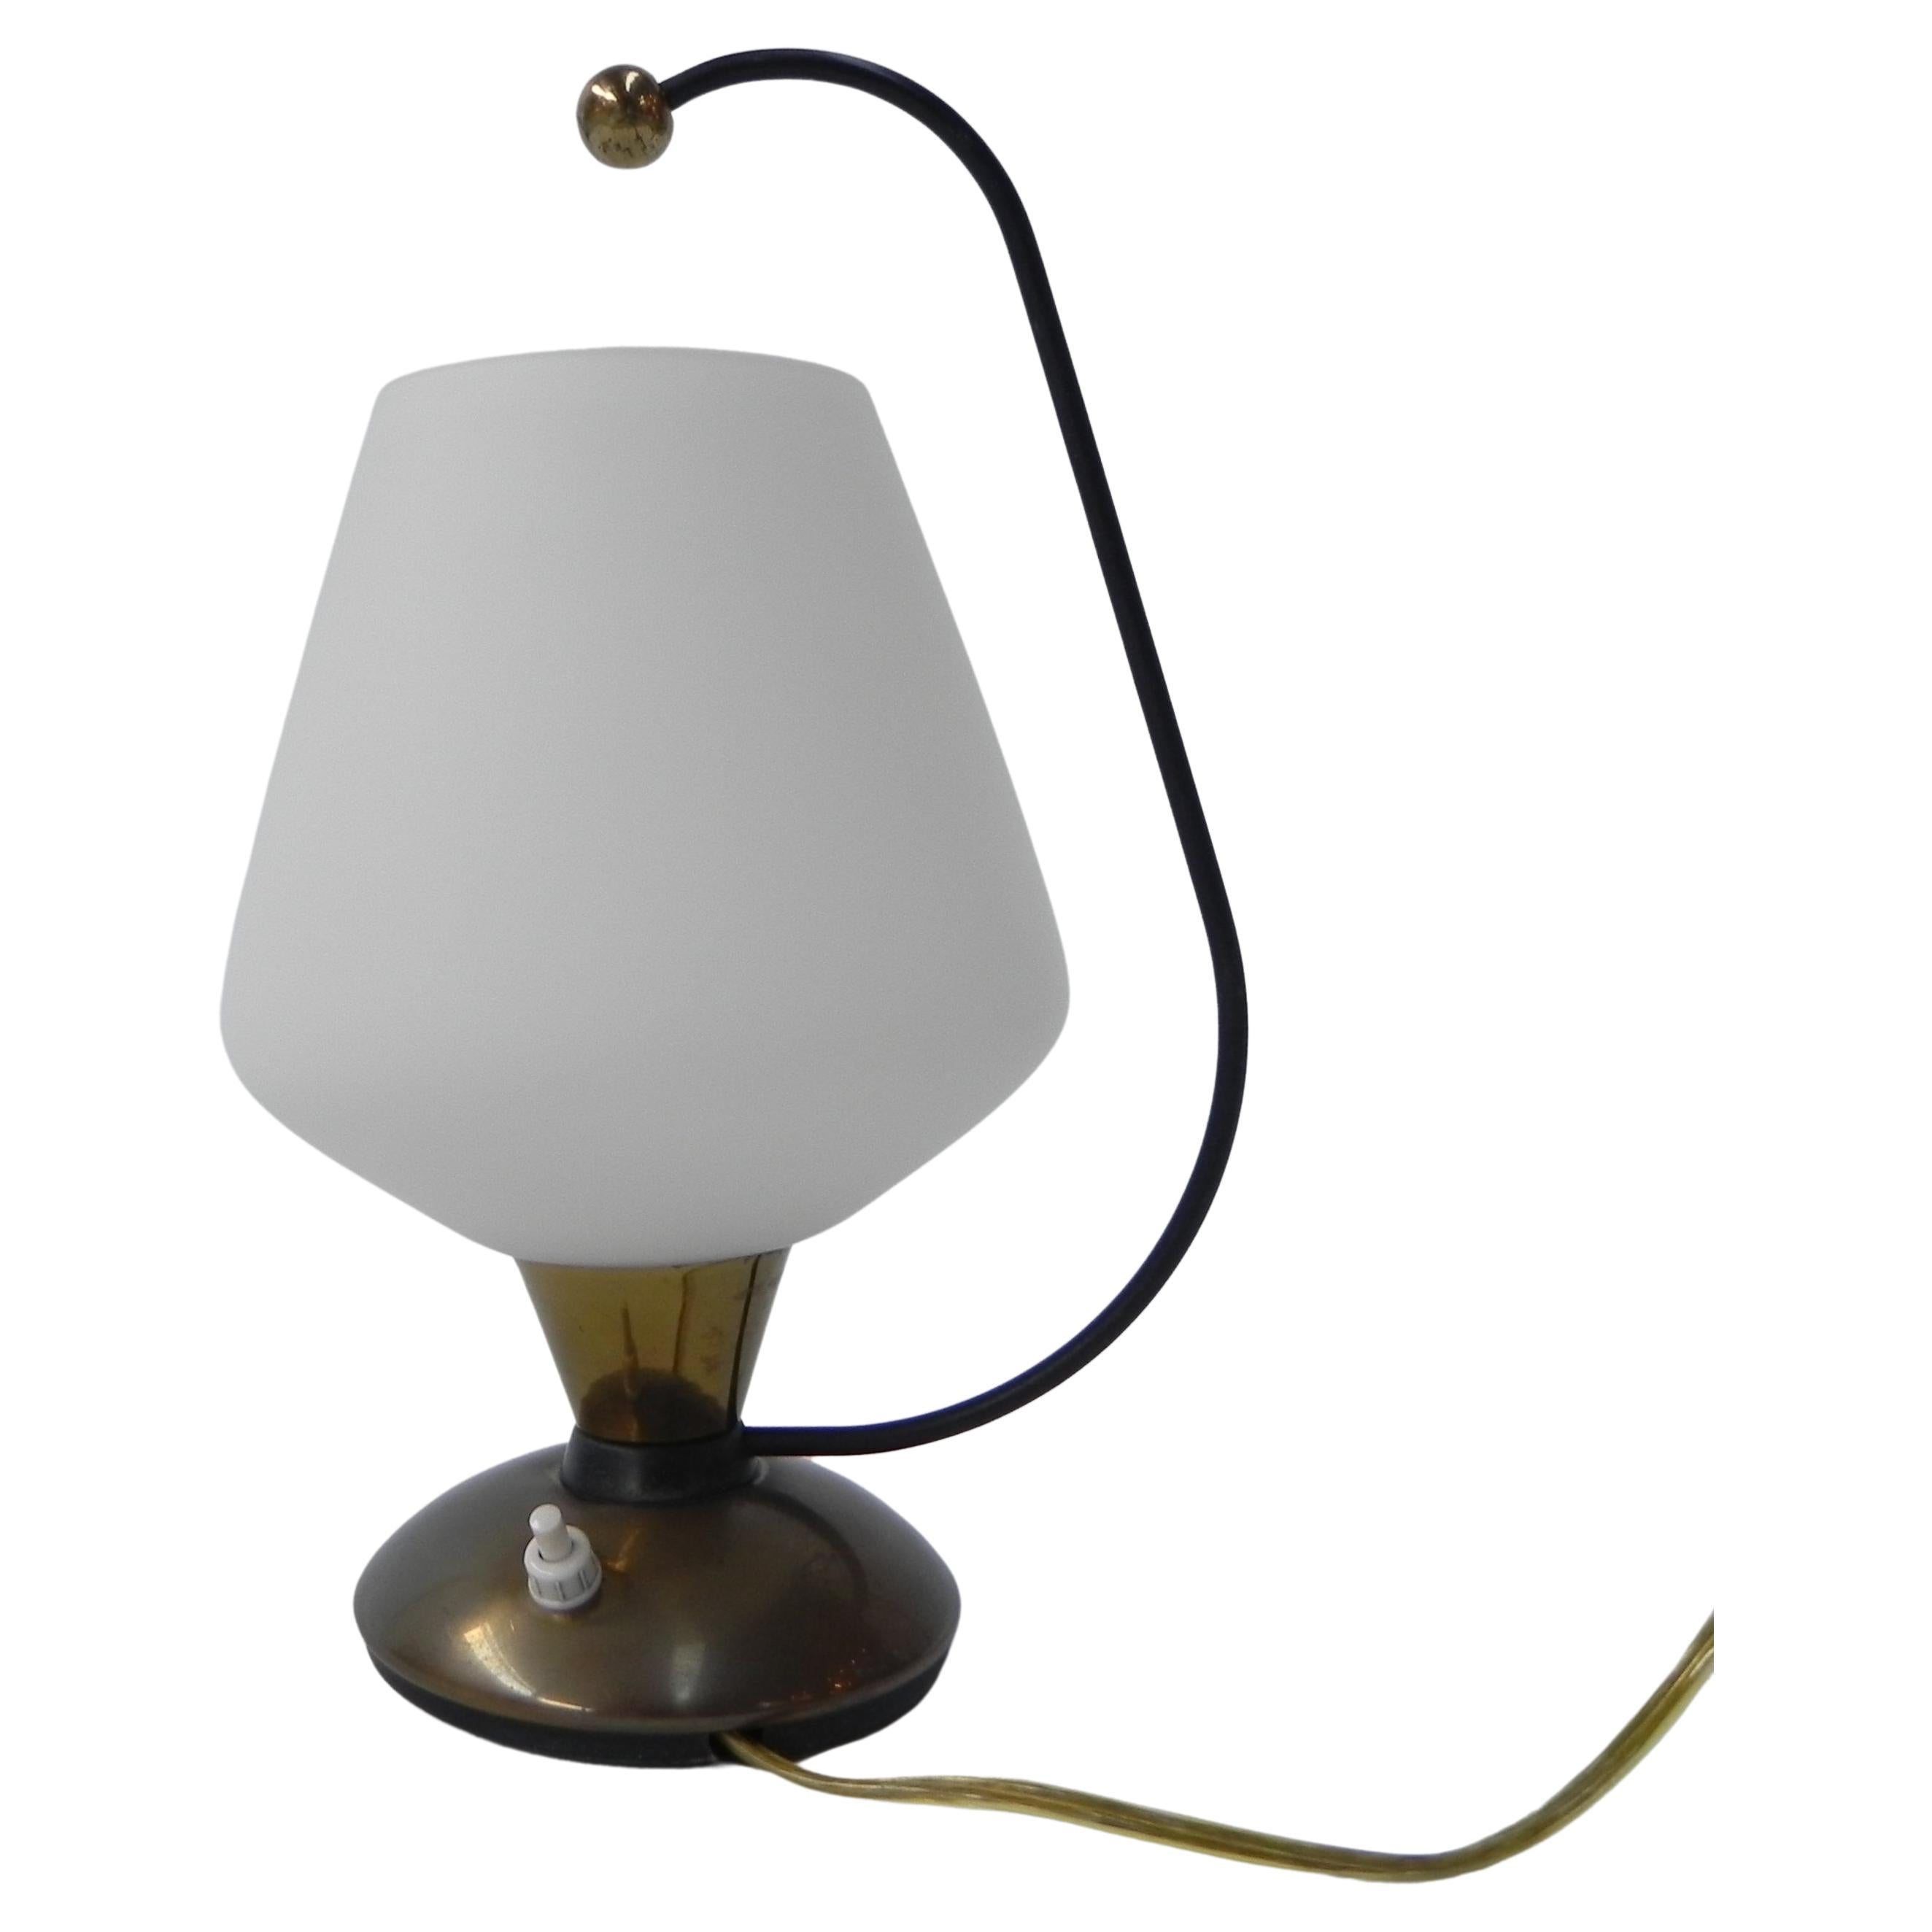 Vintage desk lamp with white glass shade For Sale